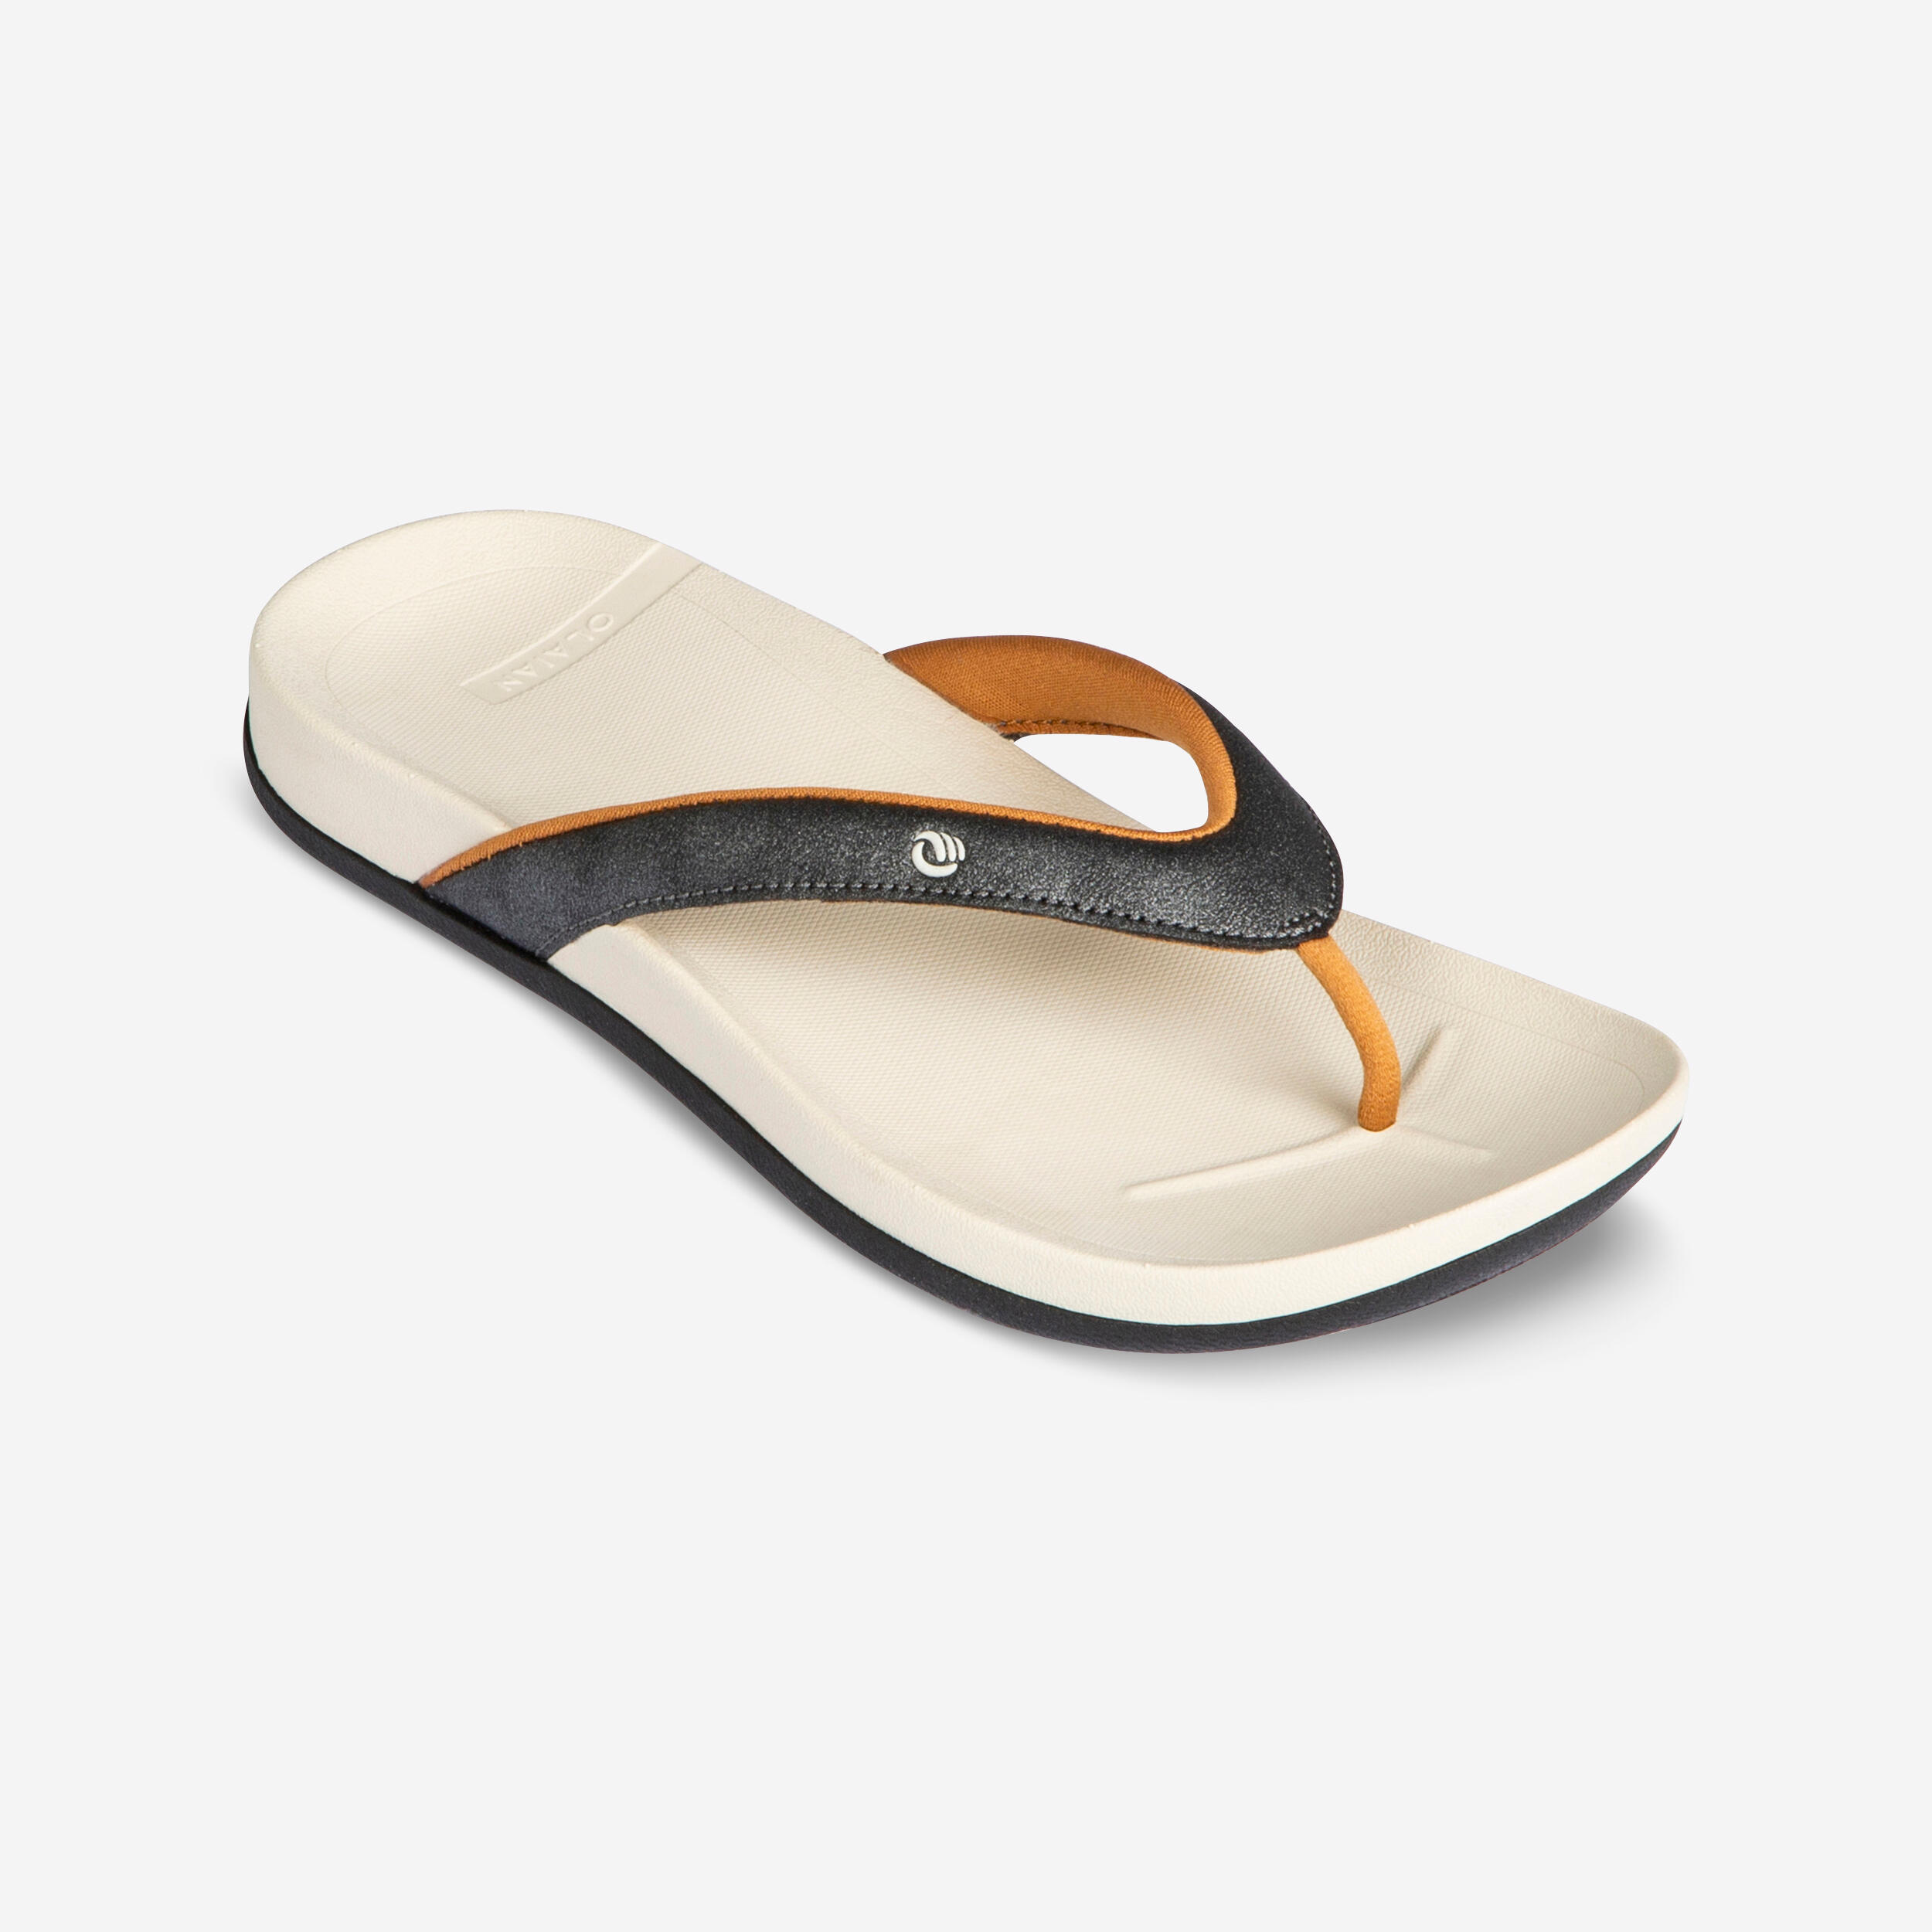 Olaian Slippers - Buy Olaian Slippers Online at Best Price - Shop Online  for Footwears in India | Flipkart.com